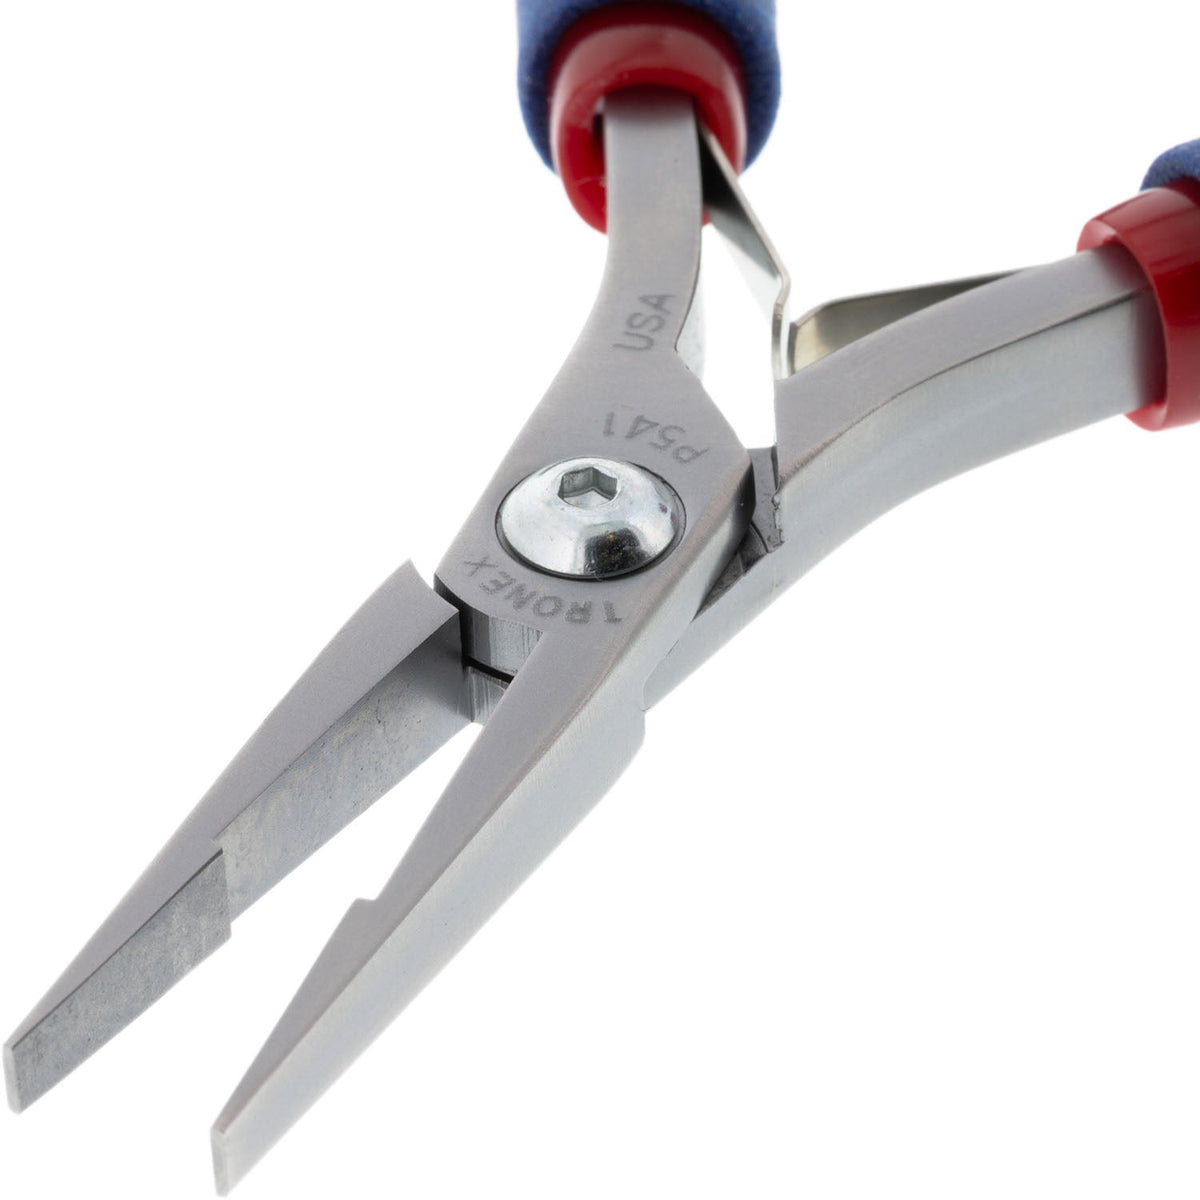 Knipex Tools - Flat Nose Plier - Wide Nose